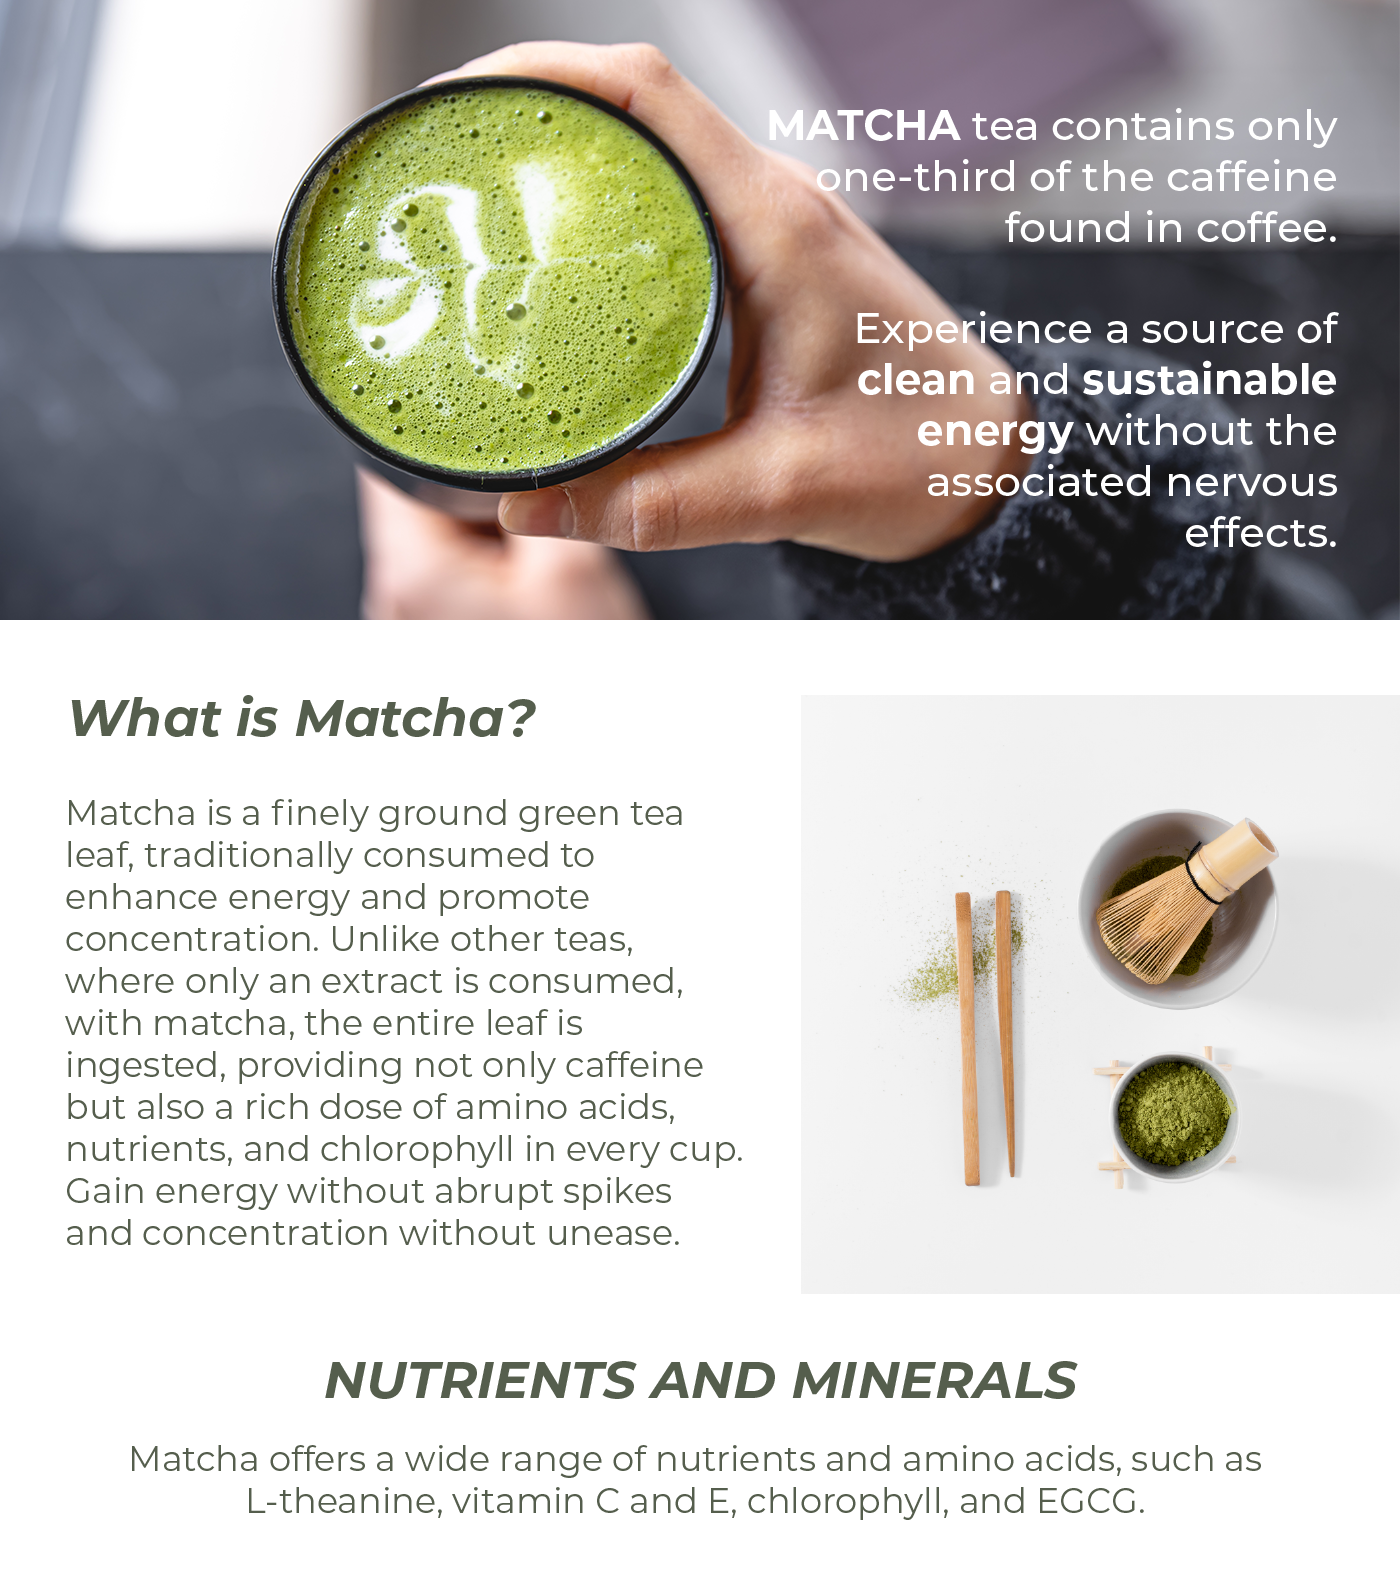 Why Matcha?  Matcha tea contains 1/3 of the caffeine compared to coffee. Get clean and sustainable energy without nervousness.  What is Matcha?  Matcha is finely ground green tea leaf traditionally consumed to boost energy and promote concentration. Unlike other teas where only an extract is consumed, with matcha, the entire leaf is ingested, providing not only caffeine but also a whole cup of amino acids, nutrients, and chlorophyll. Energy without jitters, concentration without nervousness.  NUTRIENTS AND MINERALS  Matcha contains a variety of nutrients and amino acids such as L-theanine, vitamin C and E, chlorophyll, and EGCG.